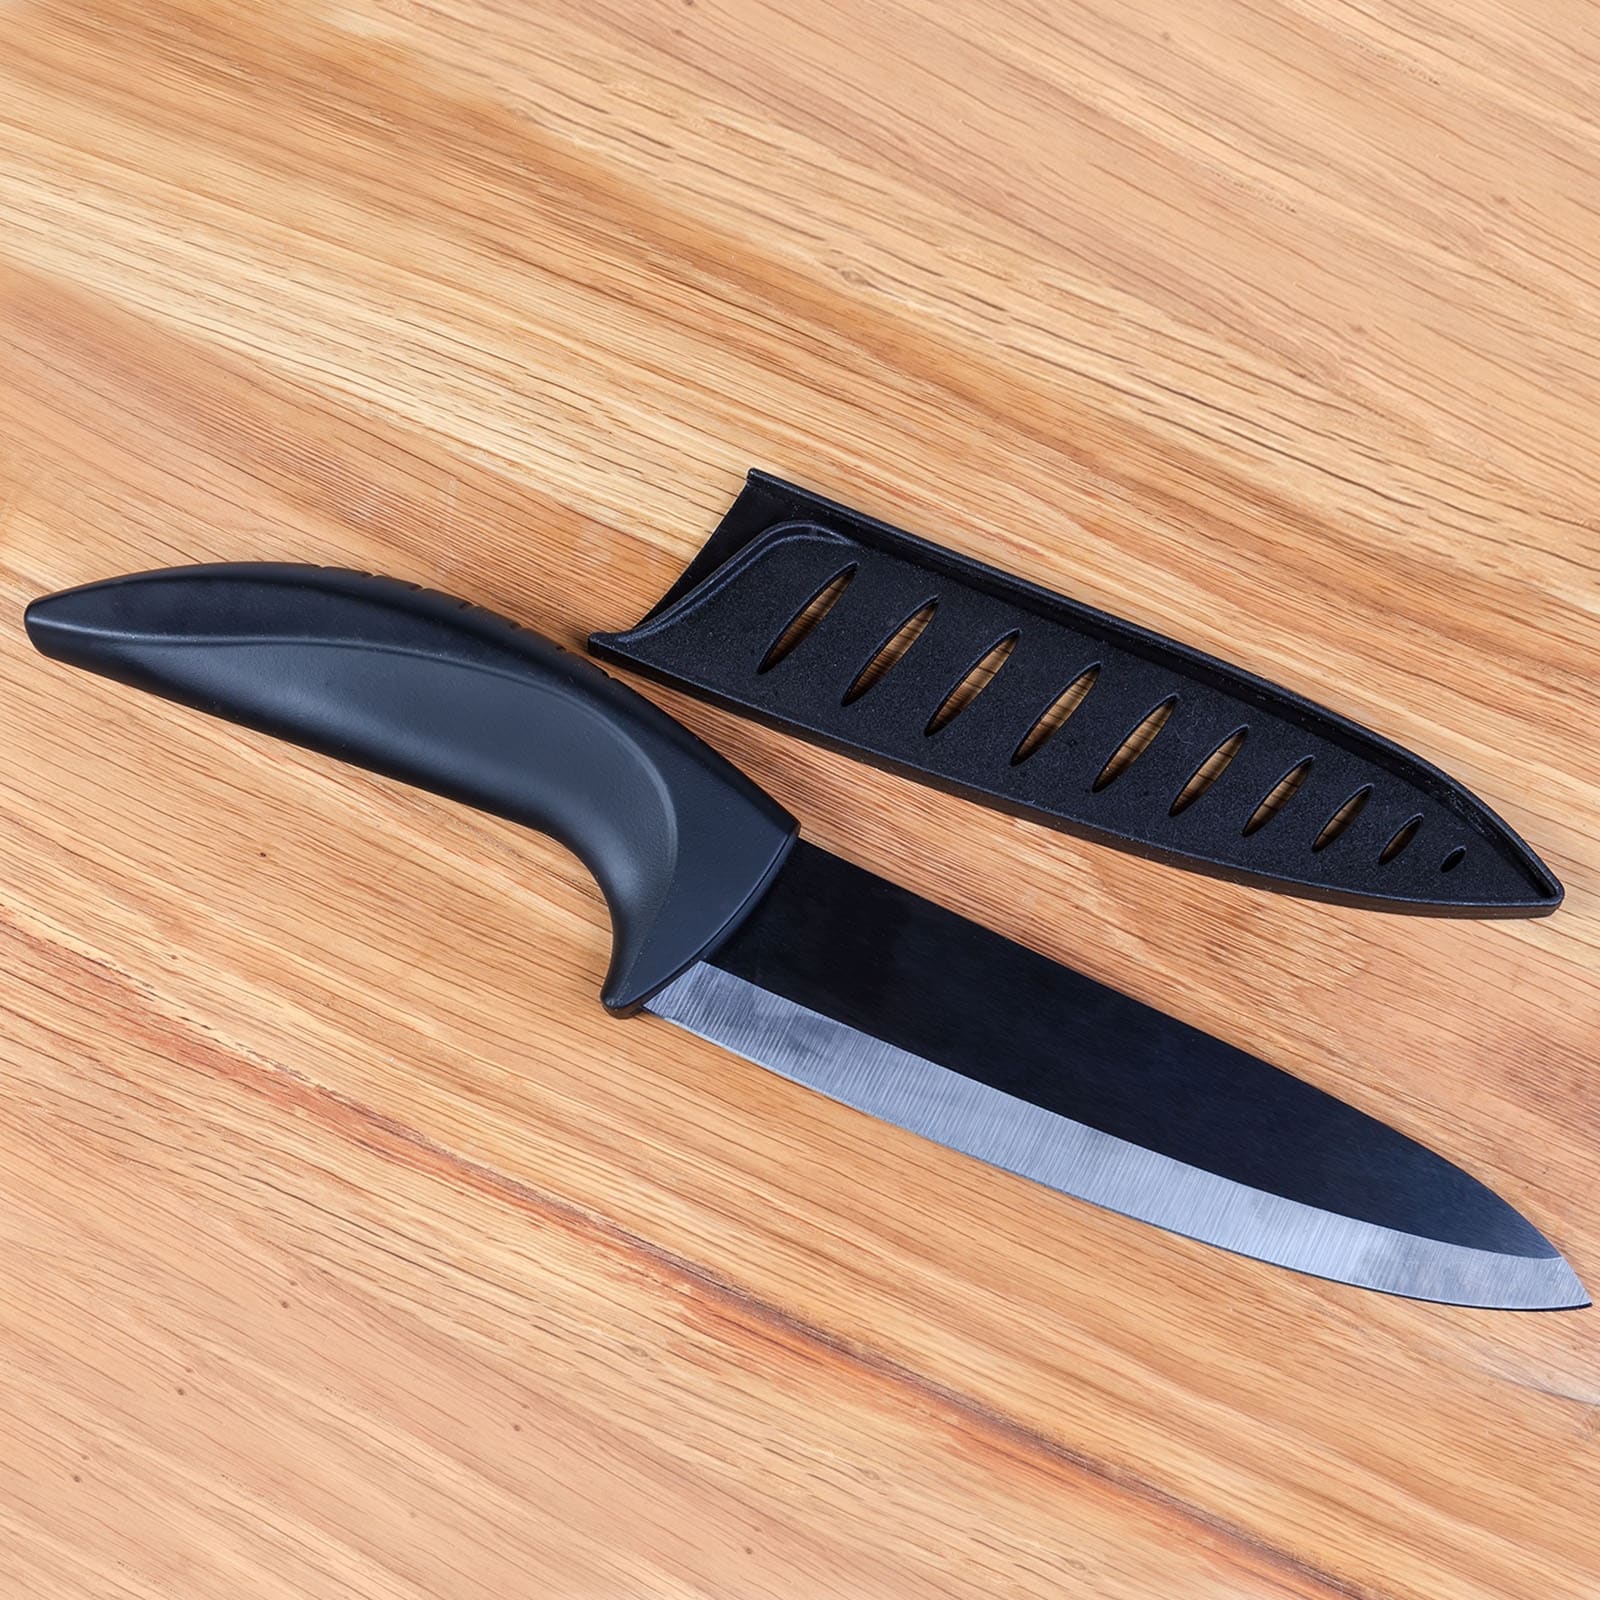 https://ak1.ostkcdn.com/images/products/is/images/direct/dfcd1d3abb09f54b06f6b4c9420c5139c638a17c/2Pcs-Plastic-Kitchen-Knife-Sheath-Cover-Sleeves-for-3.5%22-Paring-Knife.jpg